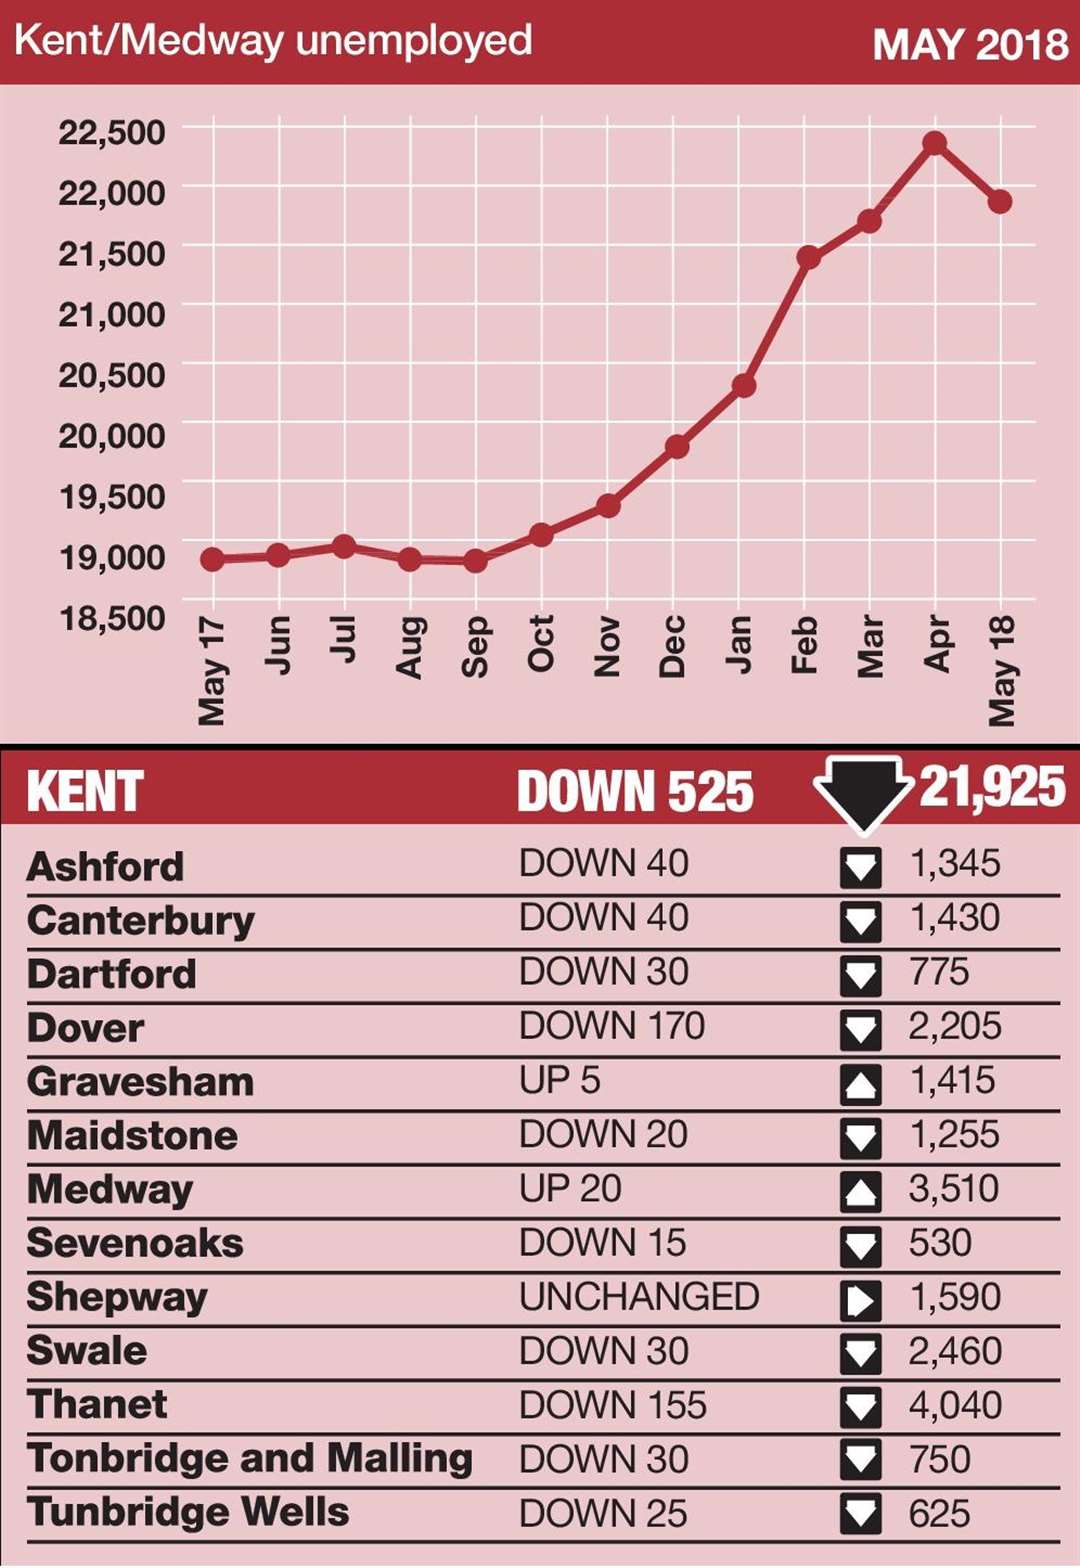 The number of people on unemployment benefits in Kent has fallen